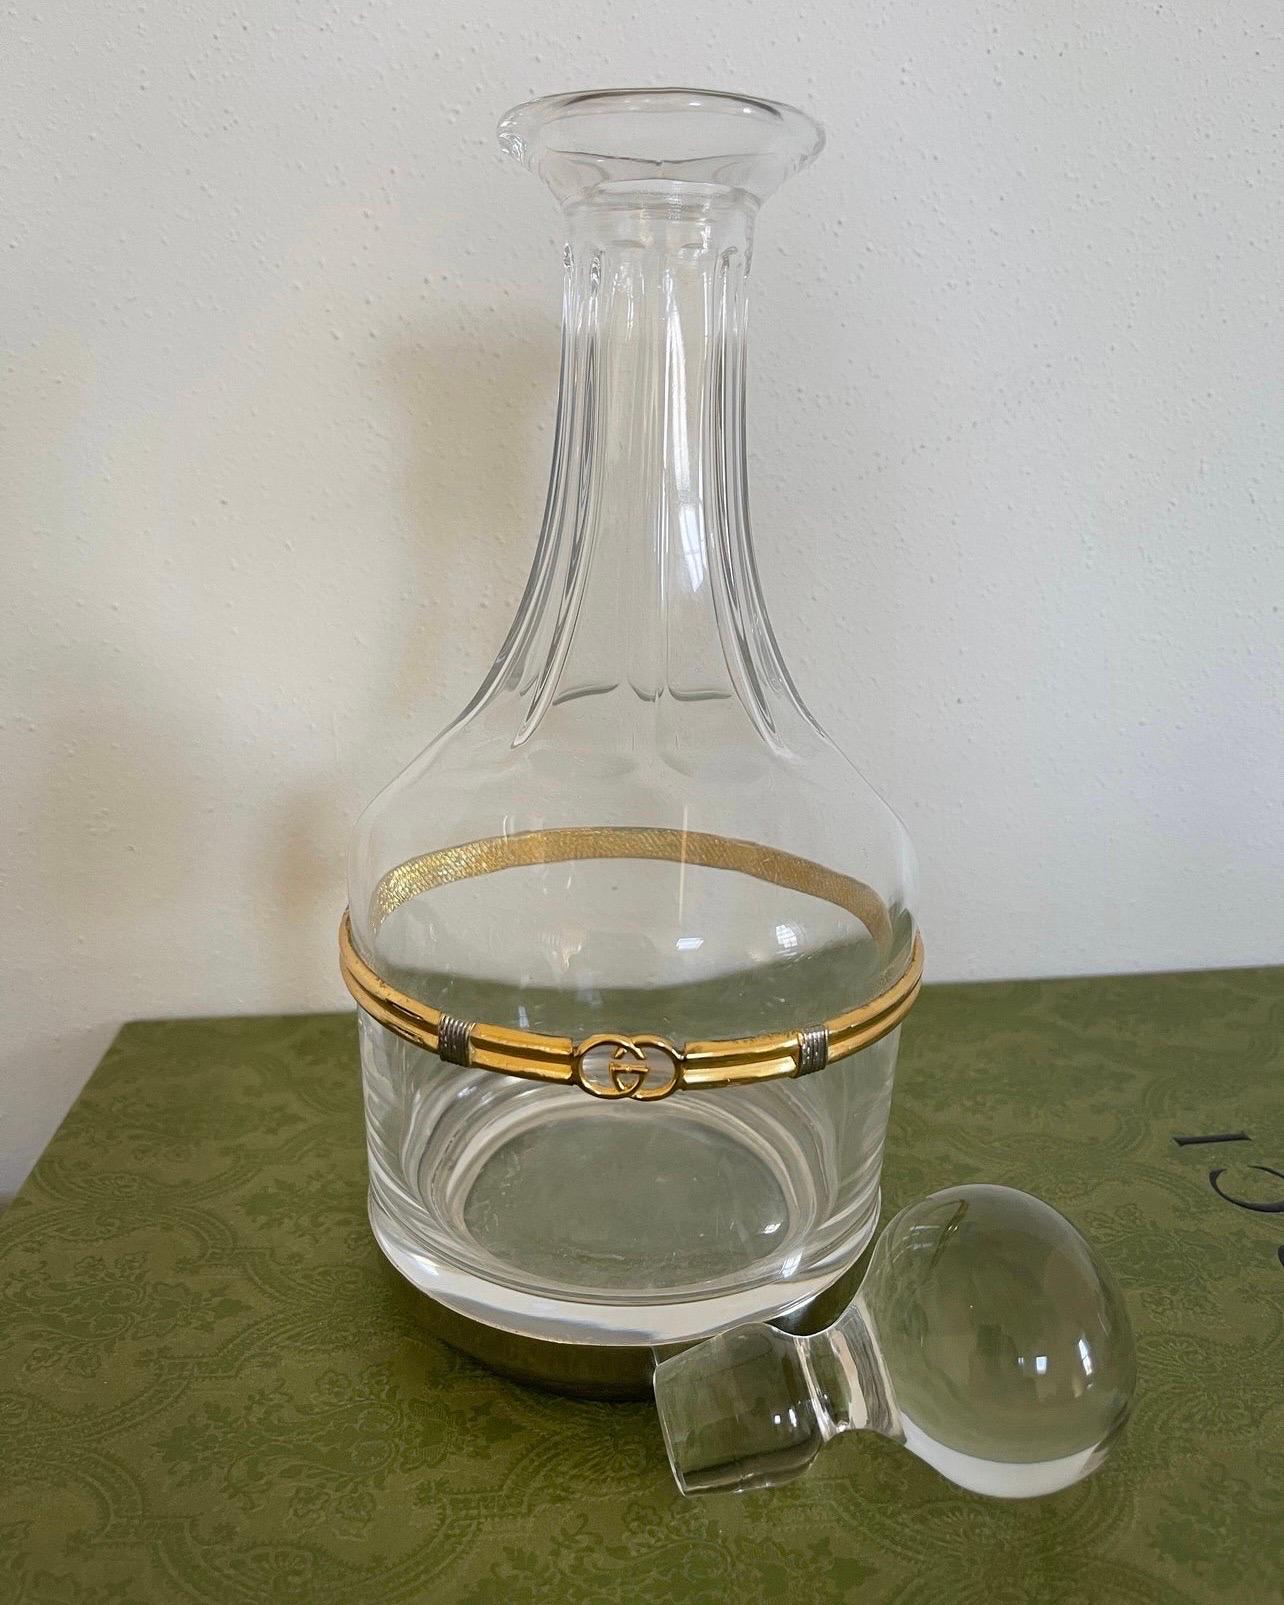 🖤Gucci heaven🖤

Authentic Vintage Gucci glass decanter with matching orb top! The most stunning addition to your home bar, or decor. 

Use this for its intended purpose or take the top off and it makes an amazing vase! Tall and chic it is a total